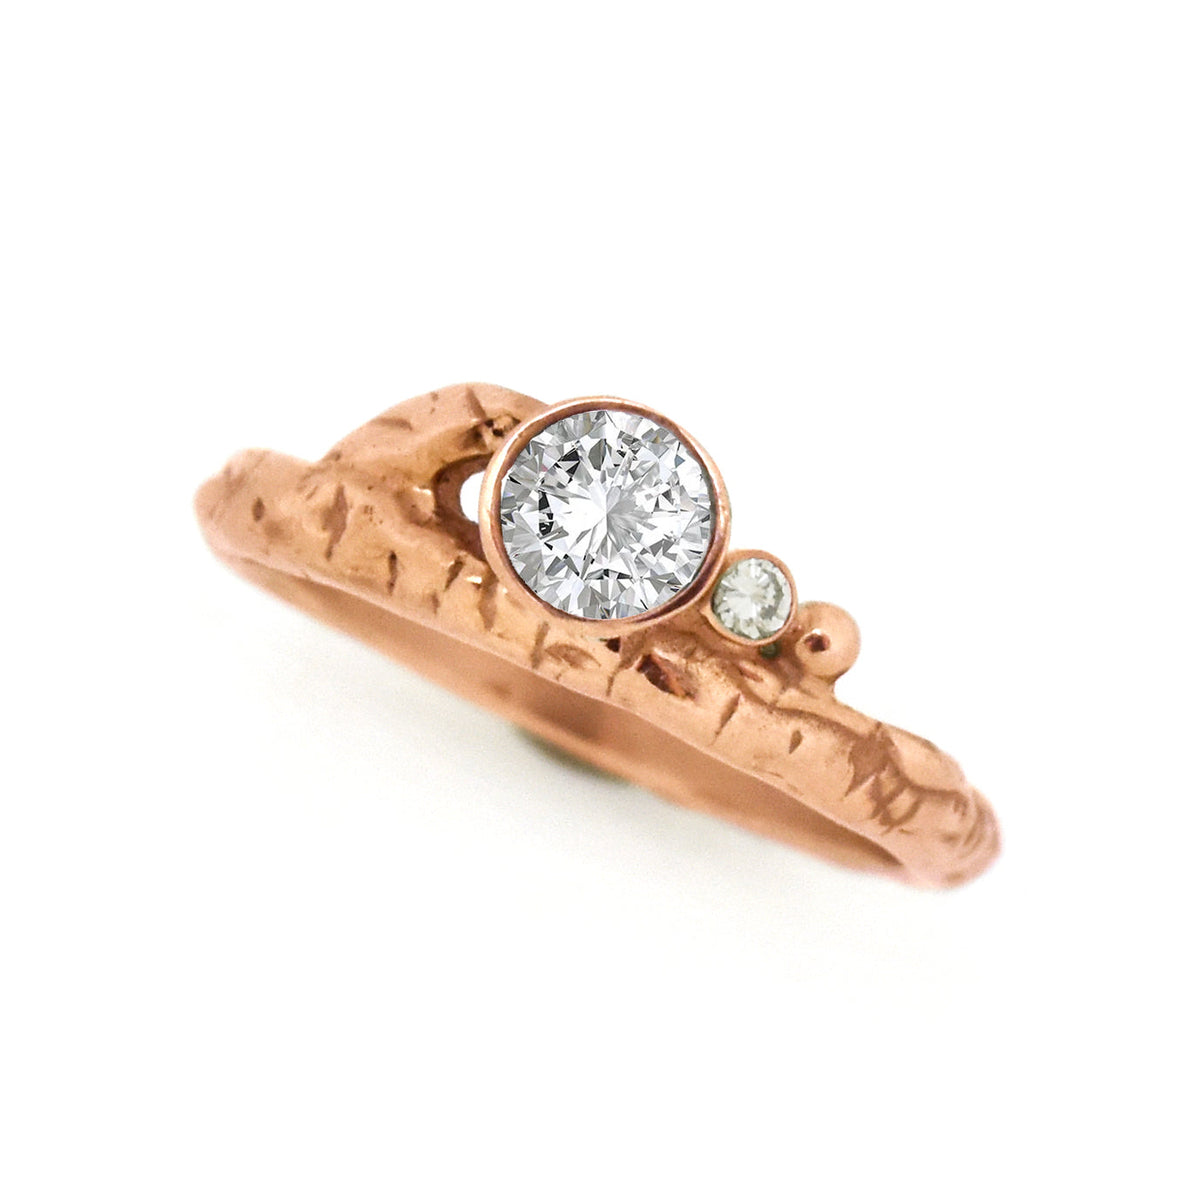 Gold Diamond Birch Twig Ring - your choice of 5mm stone & gold - Wedding Ring Recycled Diamond / 14K Rose Gold Conflict Free Diamond / 14K Rose Gold 6279 - handmade by Beth Millner Jewelry